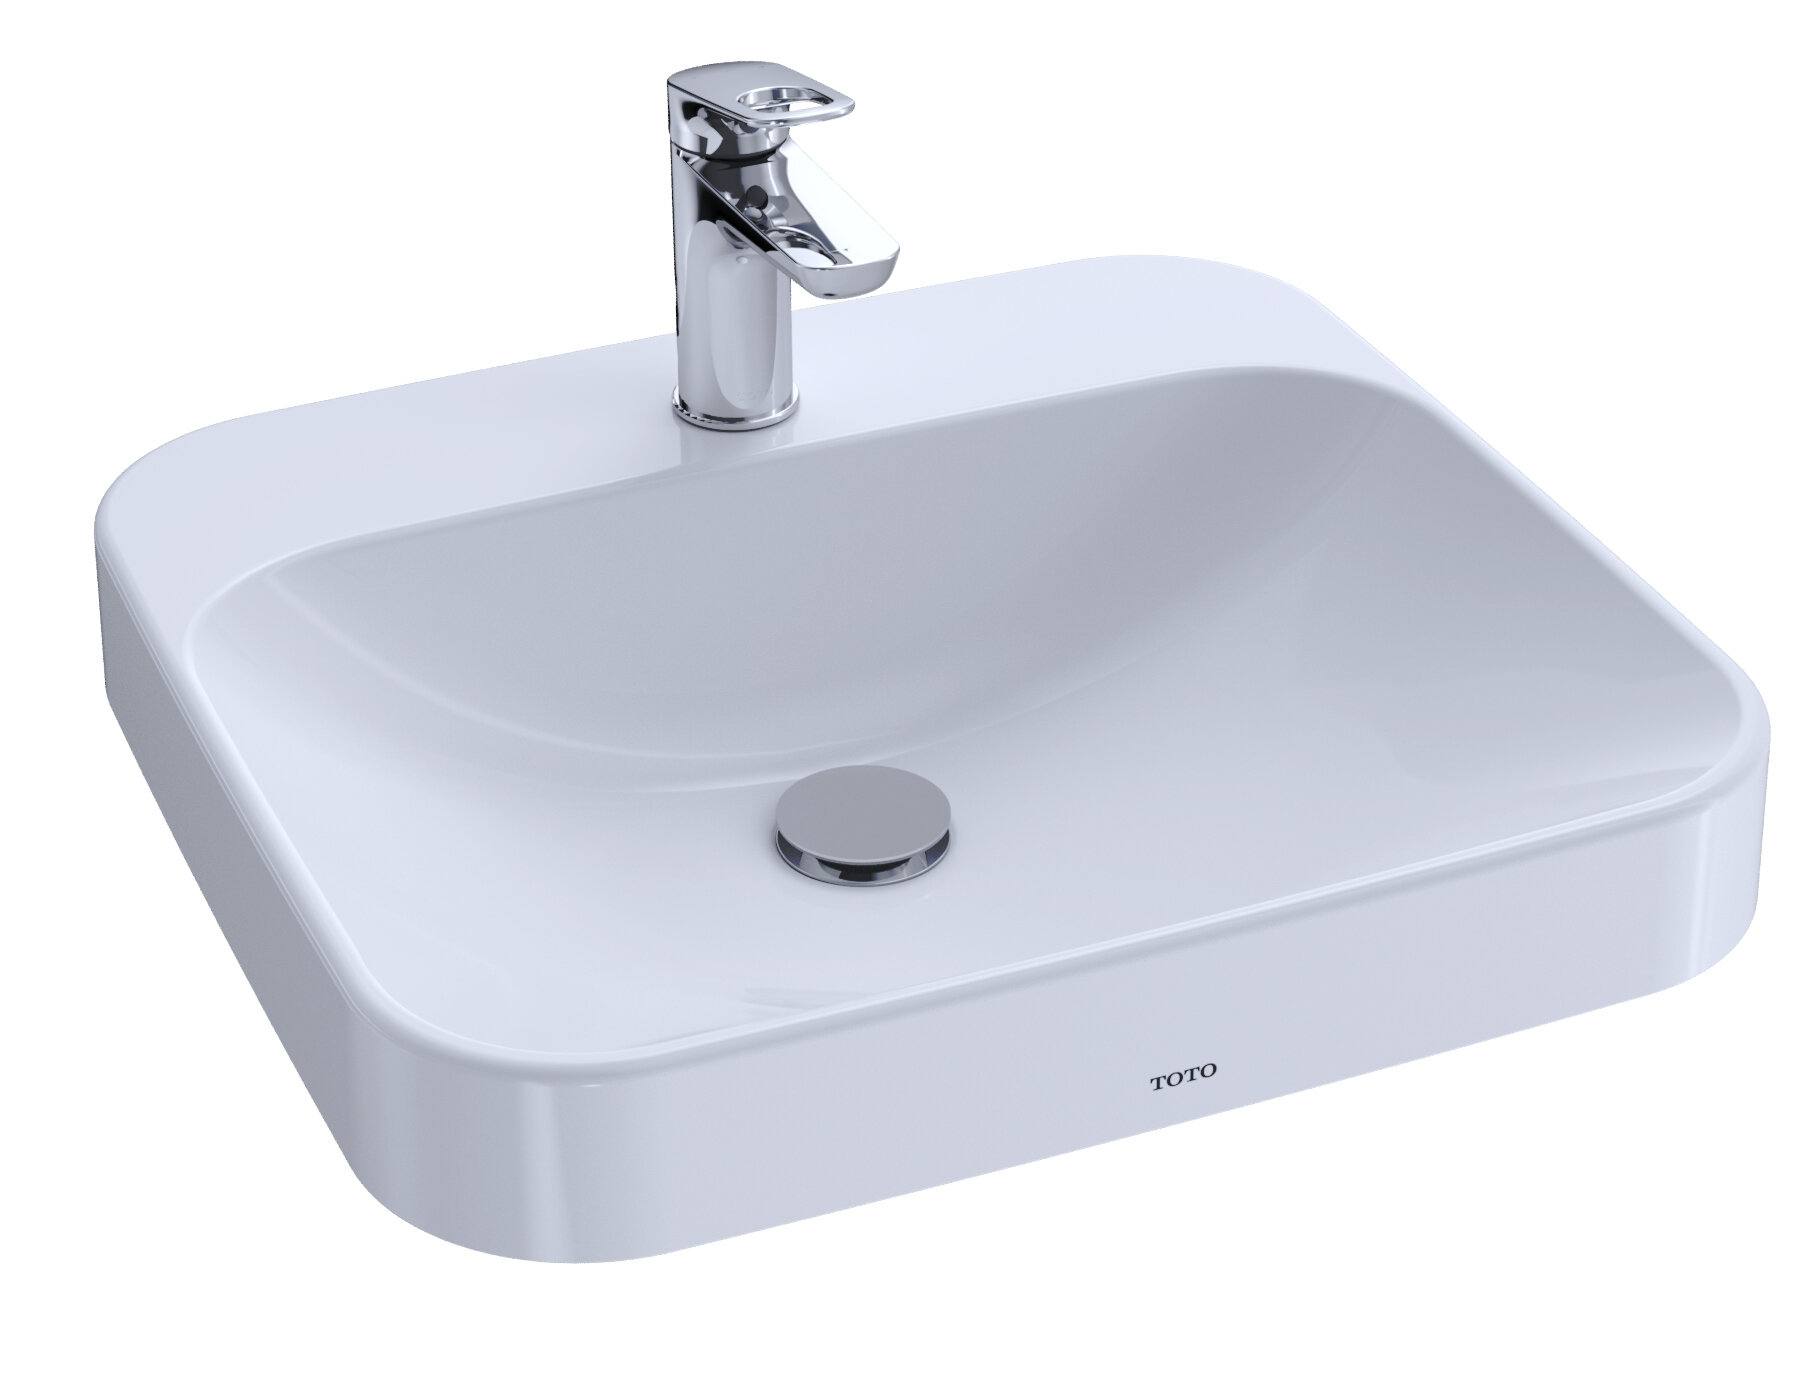 Toto Arvina Cotton White Vitreous China Rectangular Vessel Bathroom Sink With Overflow Wayfair